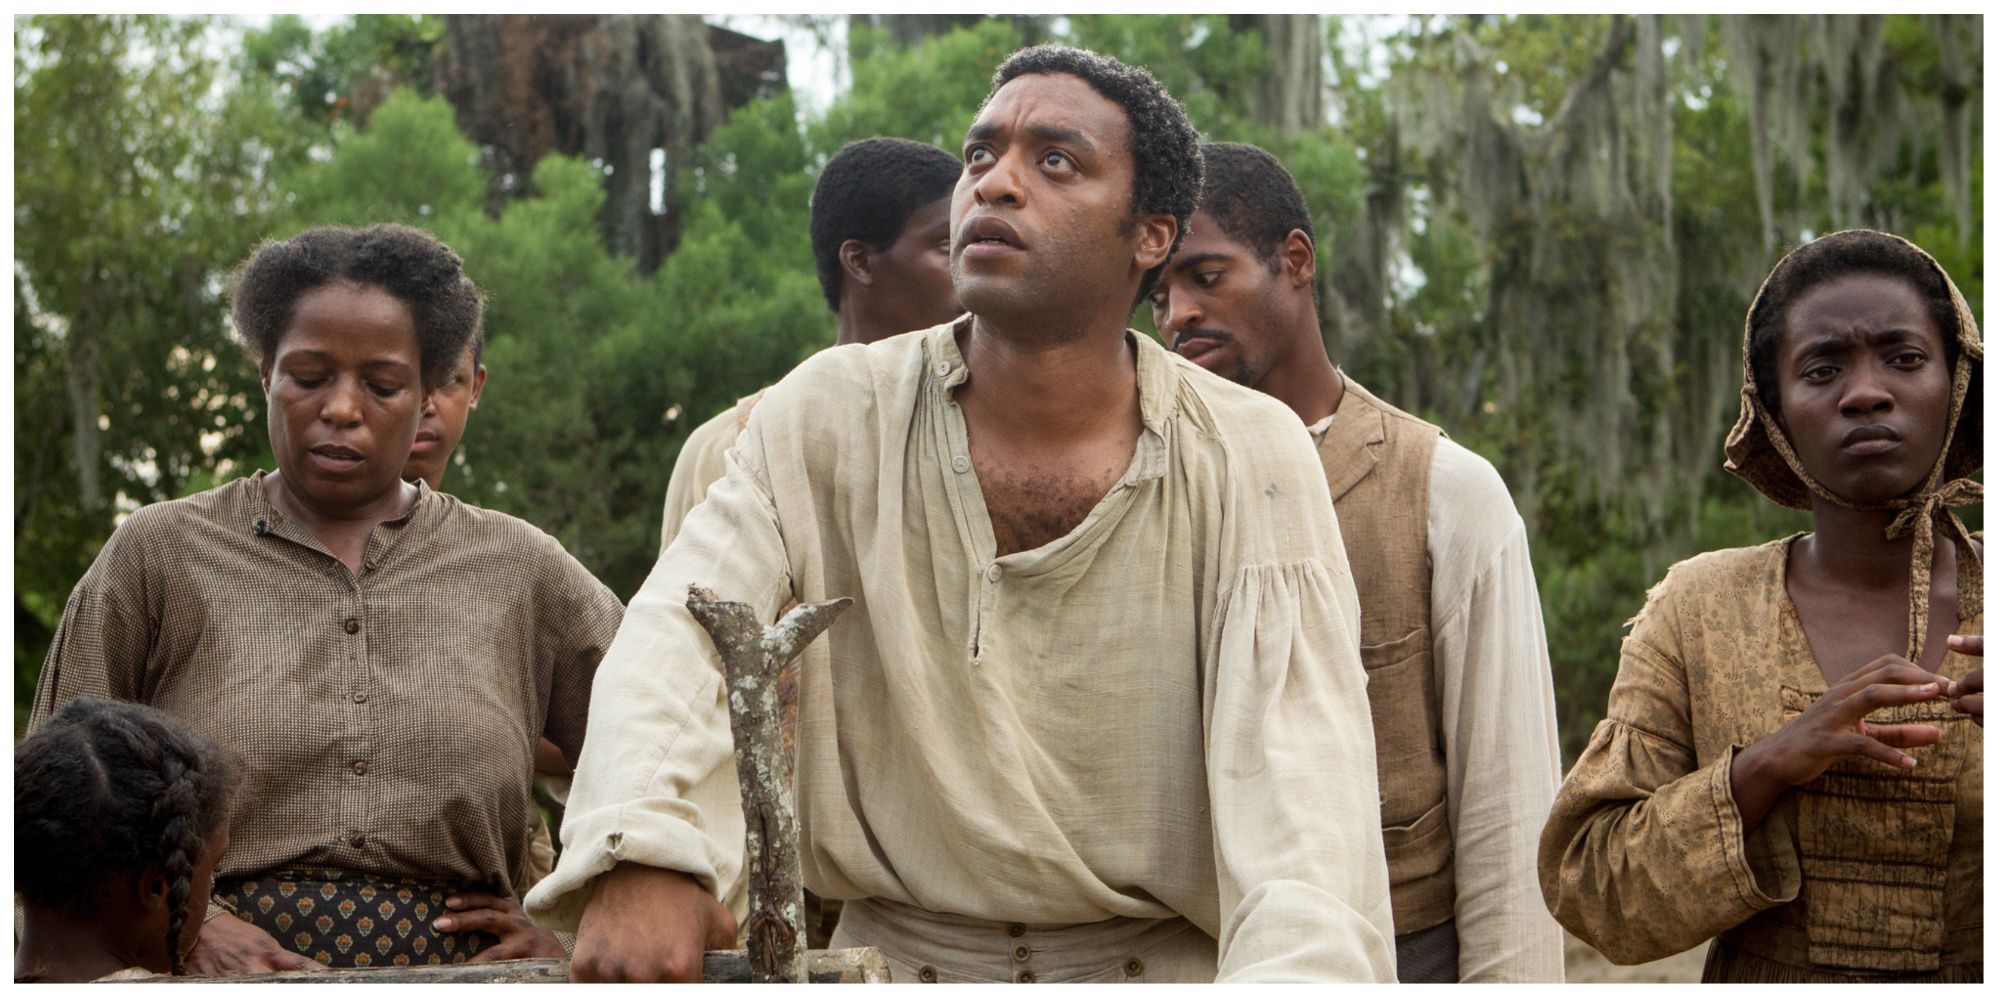 Chiwetel Ejiofor as Solomon in 12 Years A Slave